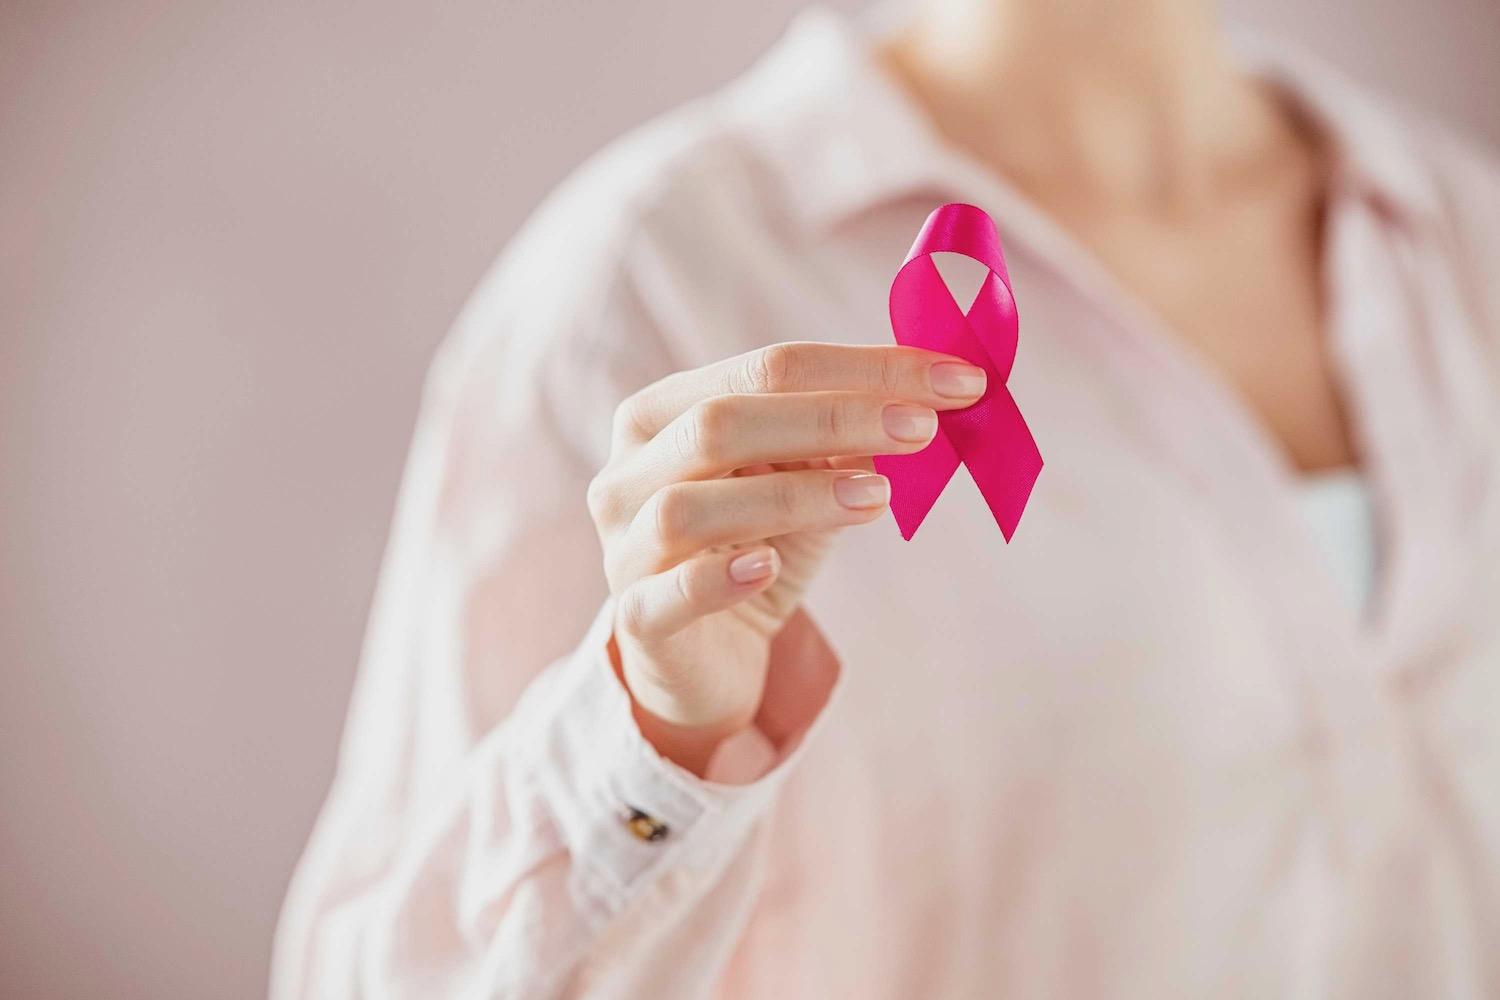 What Is The Best Strain For Breast Cancer?